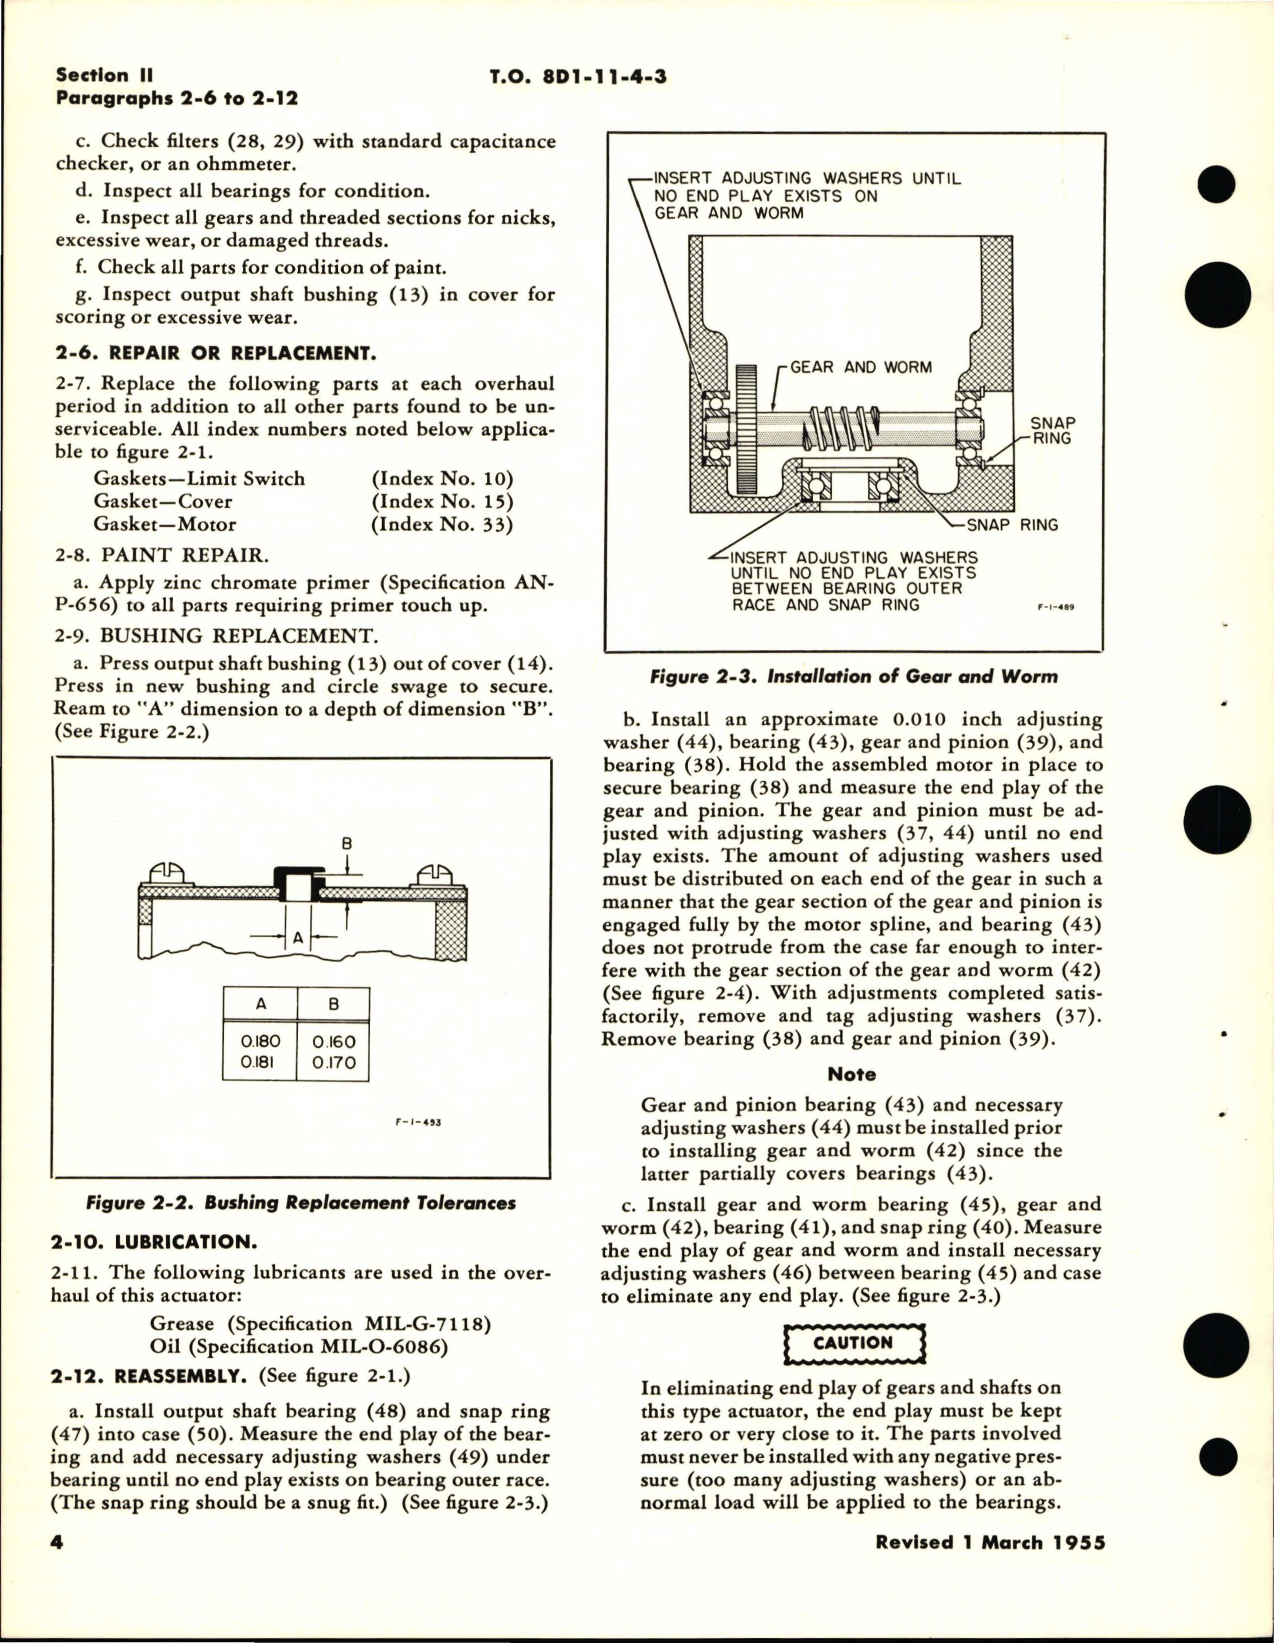 Sample page 8 from AirCorps Library document: Overhaul Instructions for Electro-Mechanical Torque Actuators 